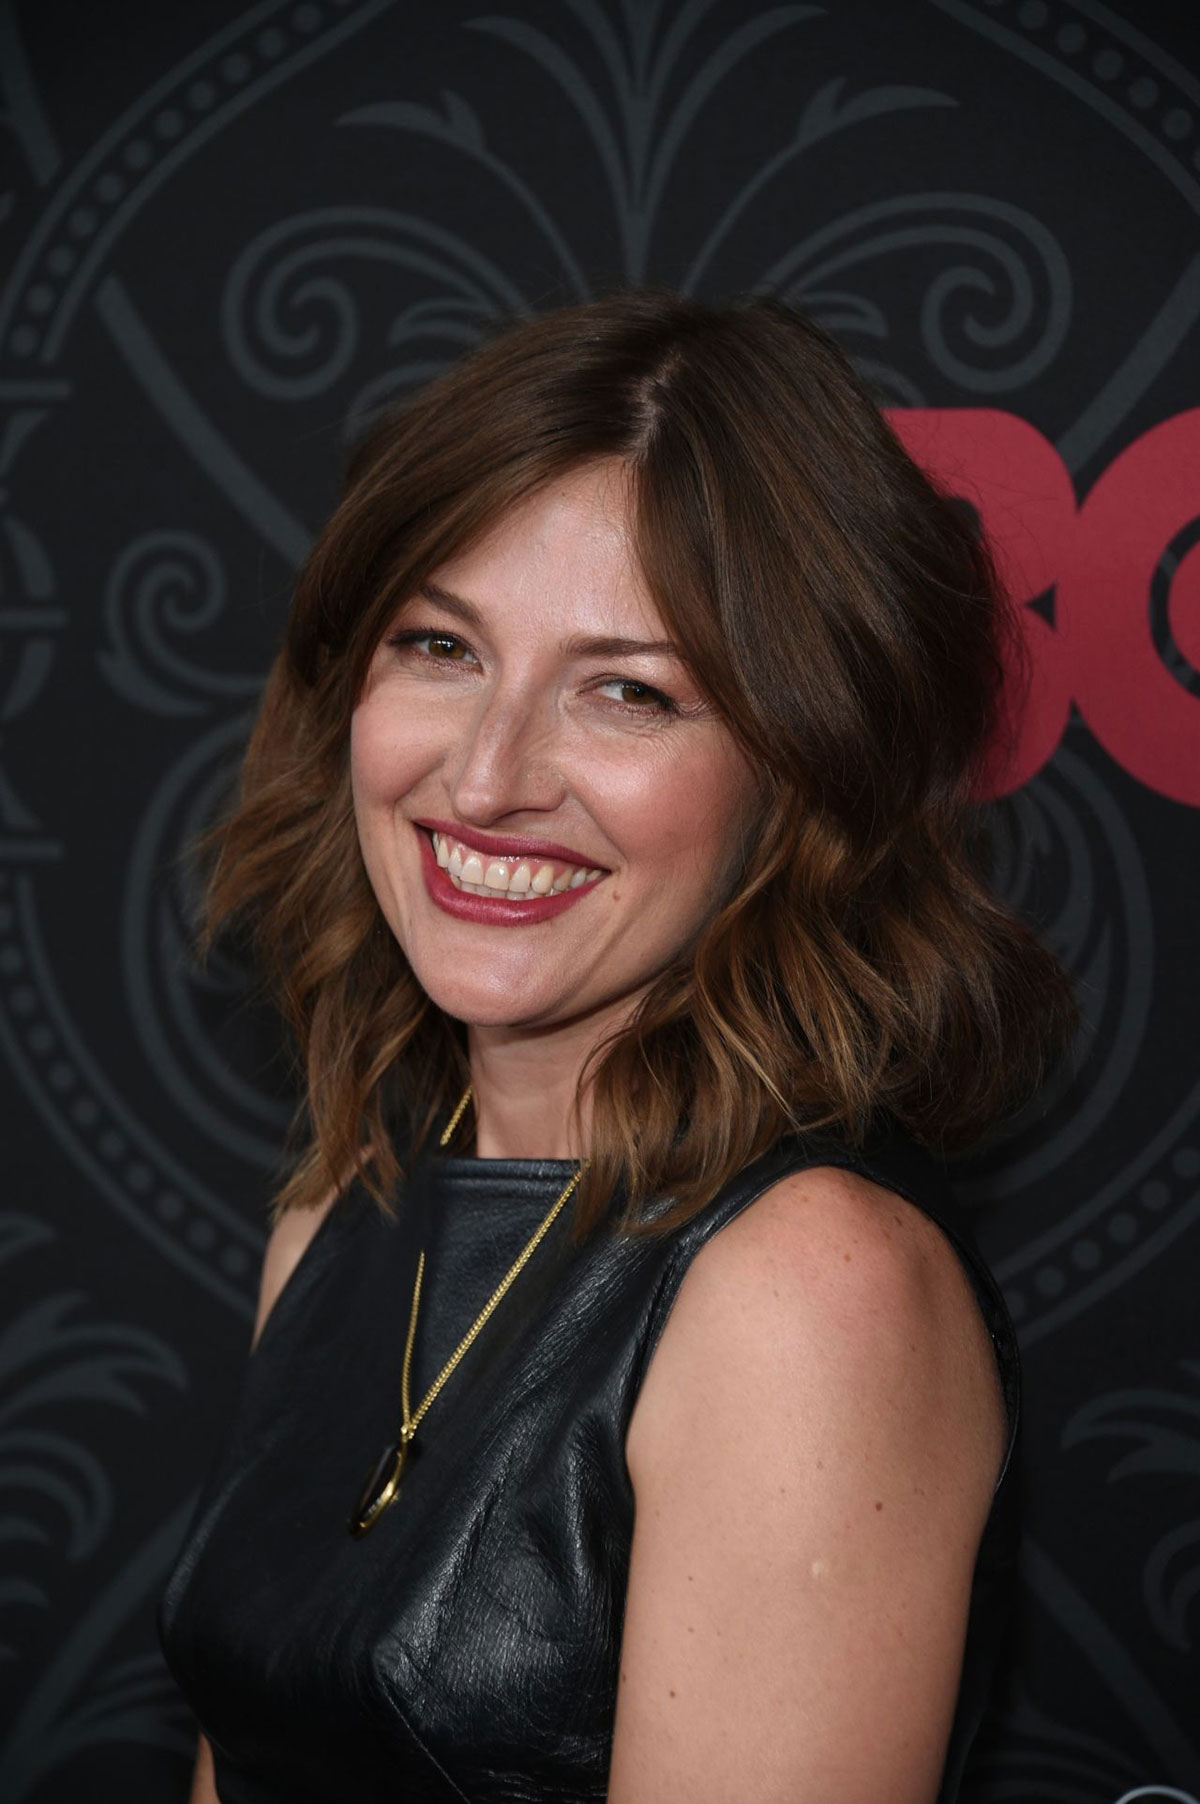 Kelly MacDonald attends the season five premiere of their hit show Boardwalk Empire